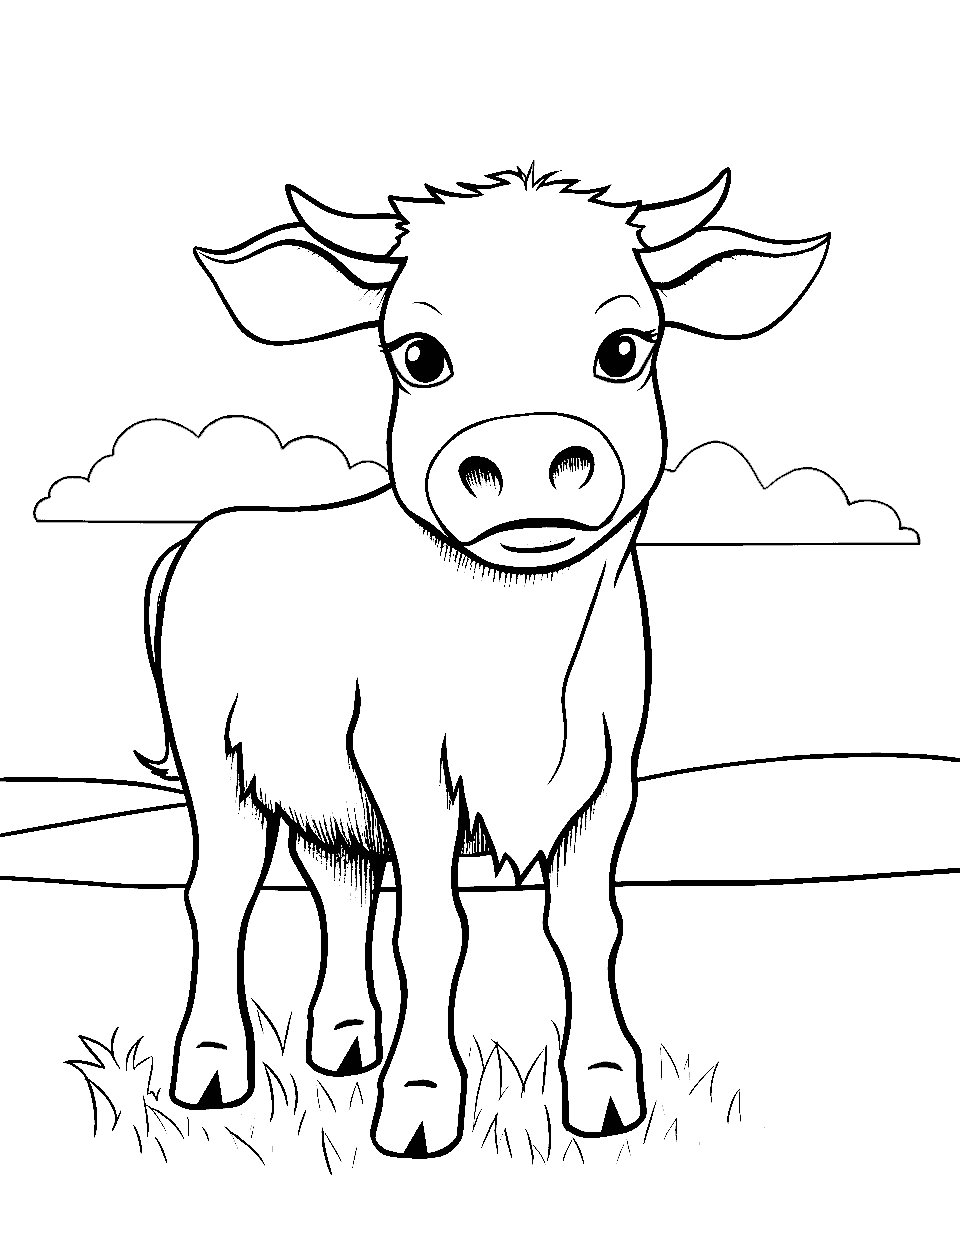 Small Cow, Big Field Coloring Page - A petite cow blissfully gazing into a vast, uncomplicated field.